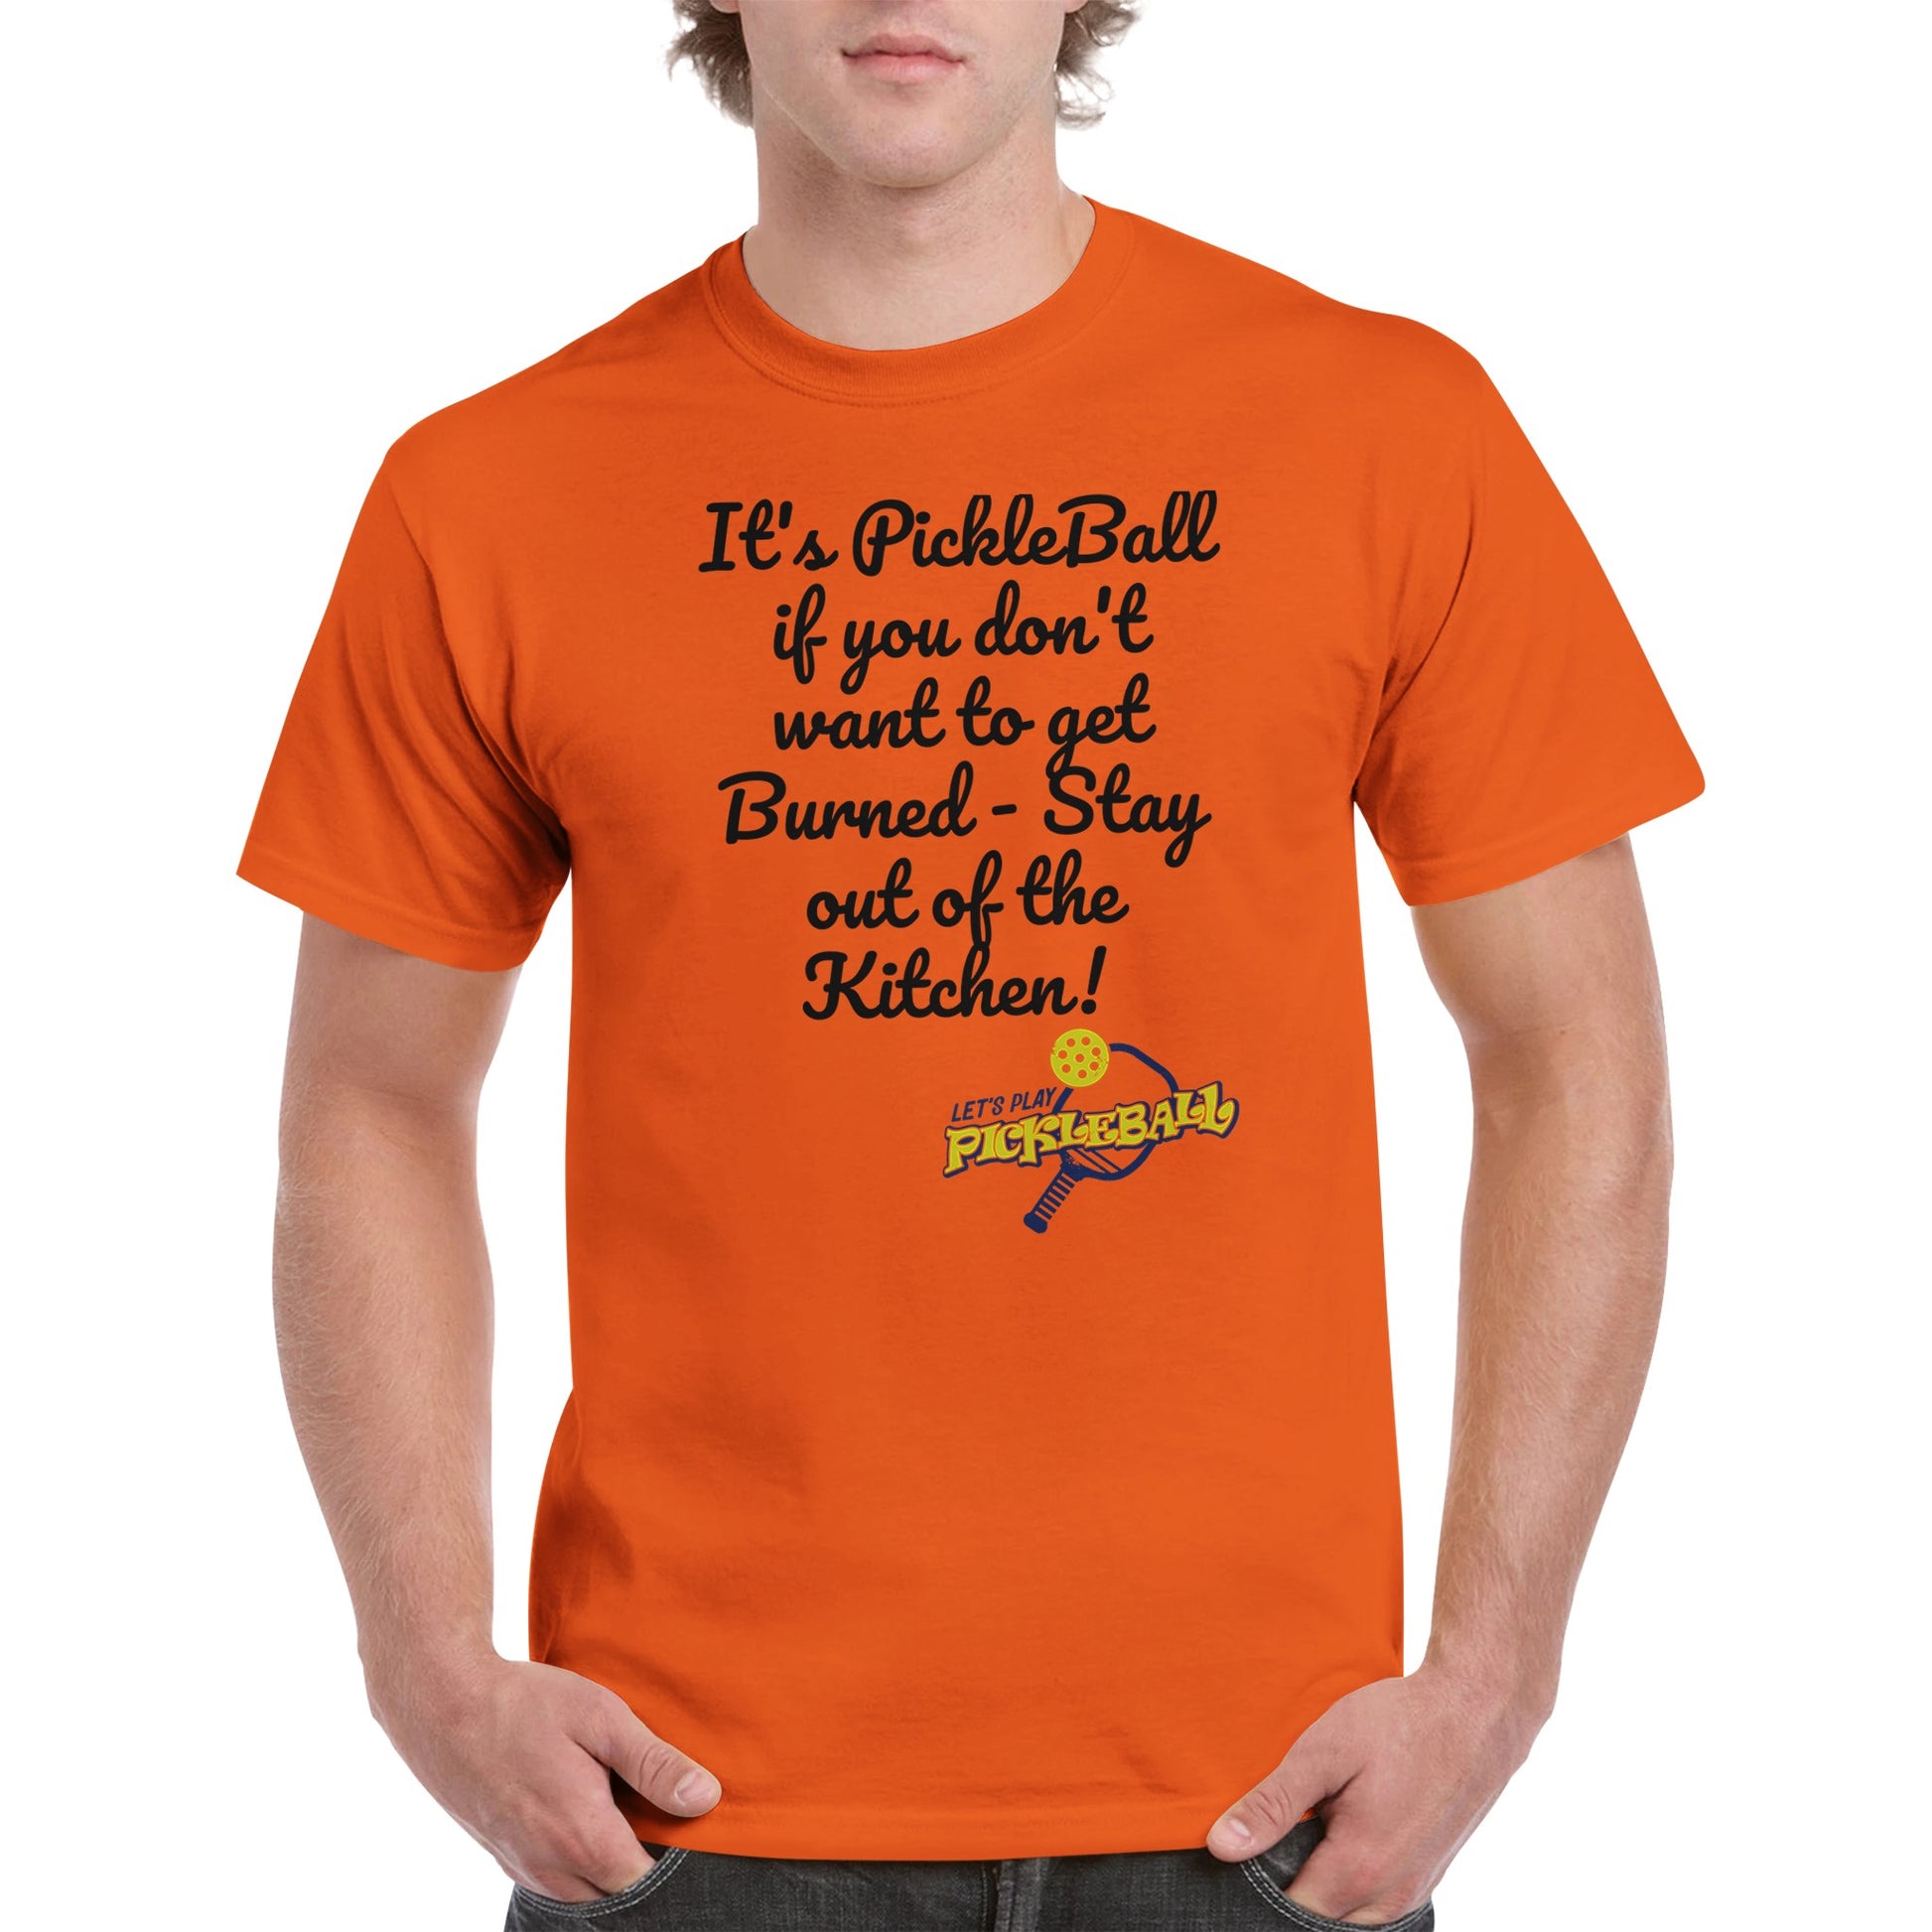 Orange comfortable Unisex Crewneck heavyweight cotton t-shirt with funny saying It’s PickleBall if you don’t want to get Burned – Stay out of the Kitchen! and Let’s Play Pickleball logo on the front from WhatYa Say Apparel worn by blonde-haired male front view.